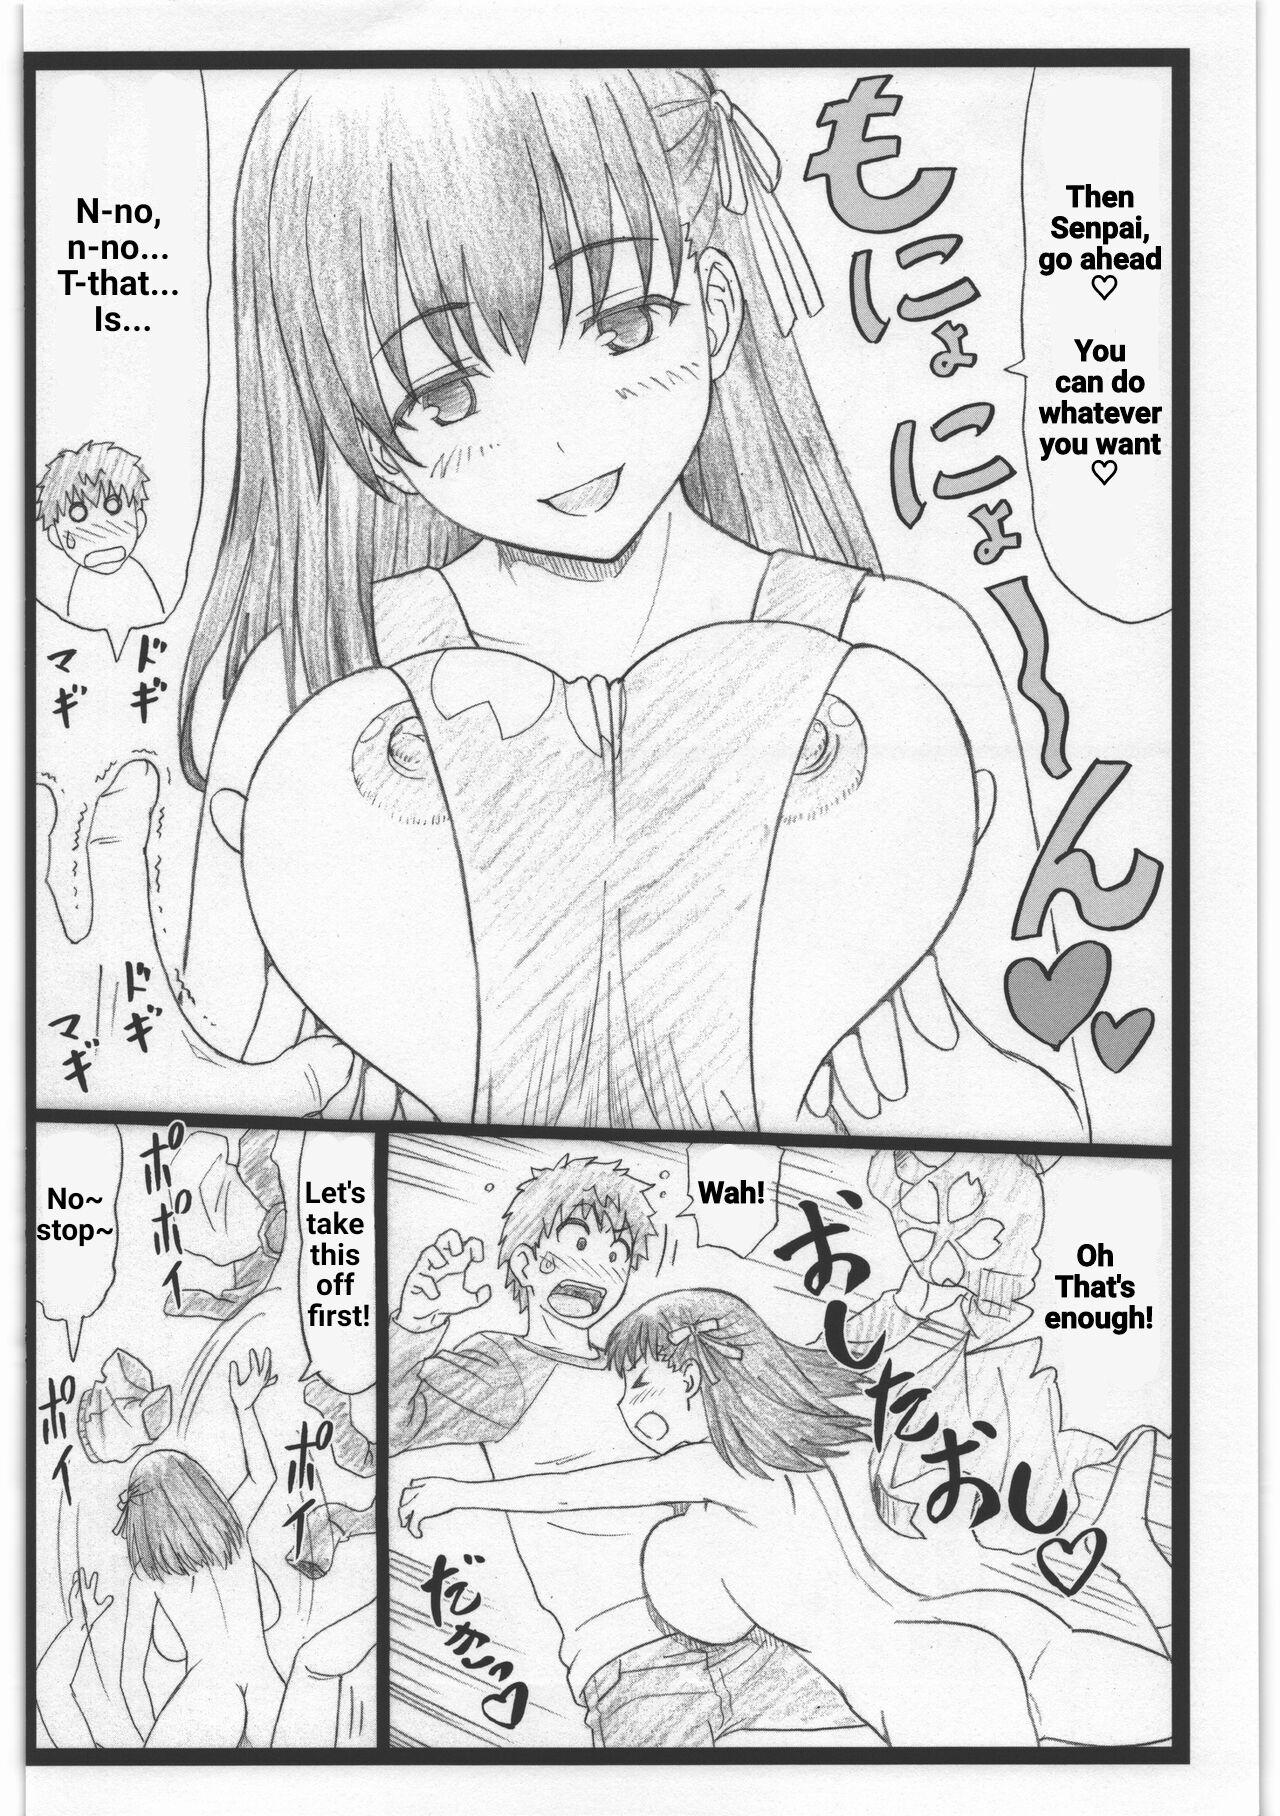 Reverse Cowgirl C88 Omakebon - Fate stay night Thailand - Page 2